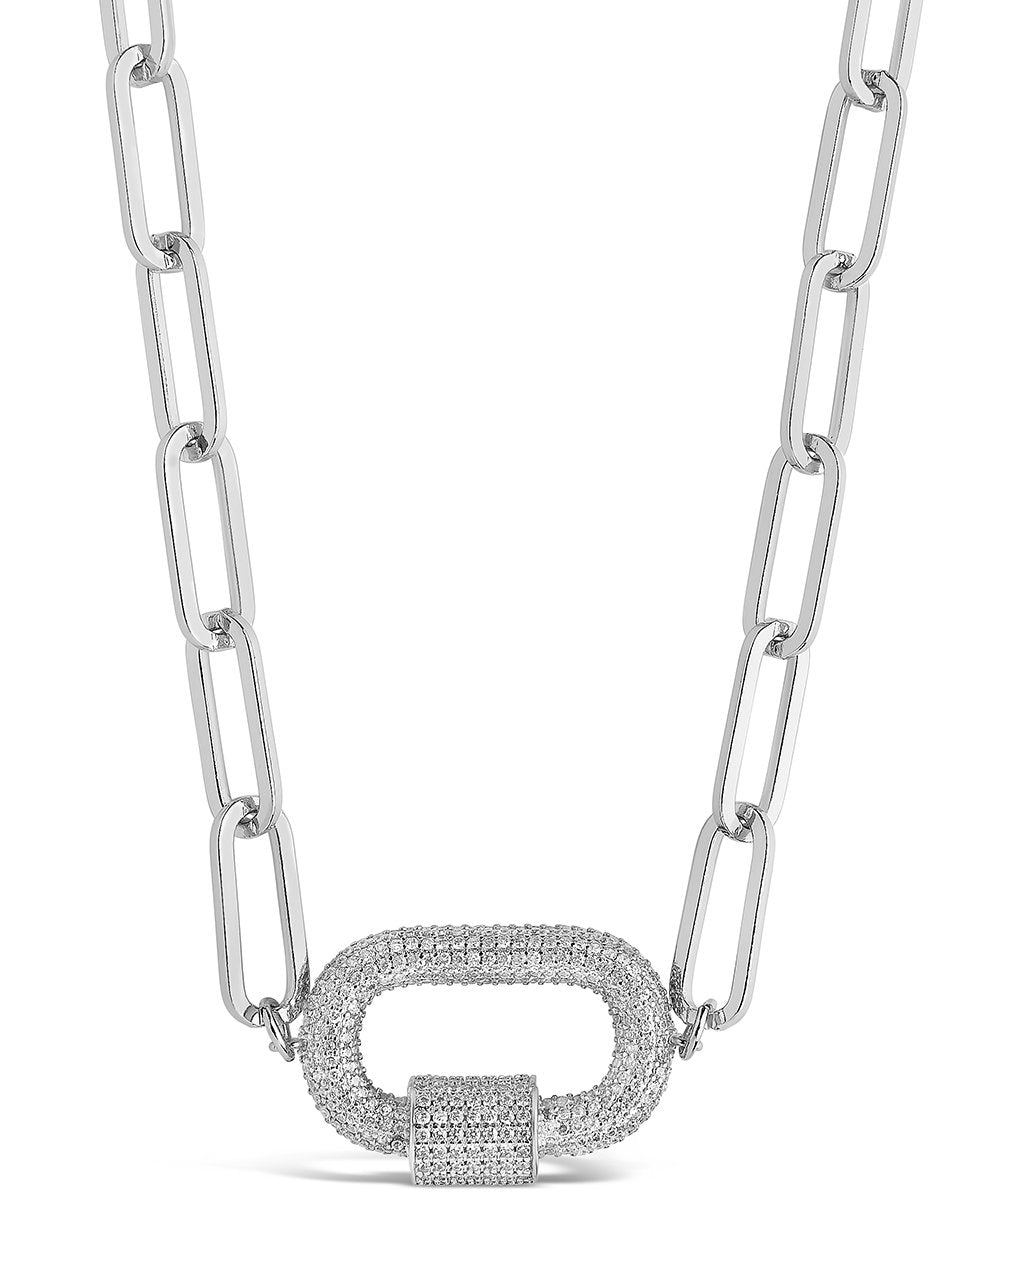 Pave CZ Carabiner Linked Lock Necklace Necklace Sterling Forever Silver Clear 